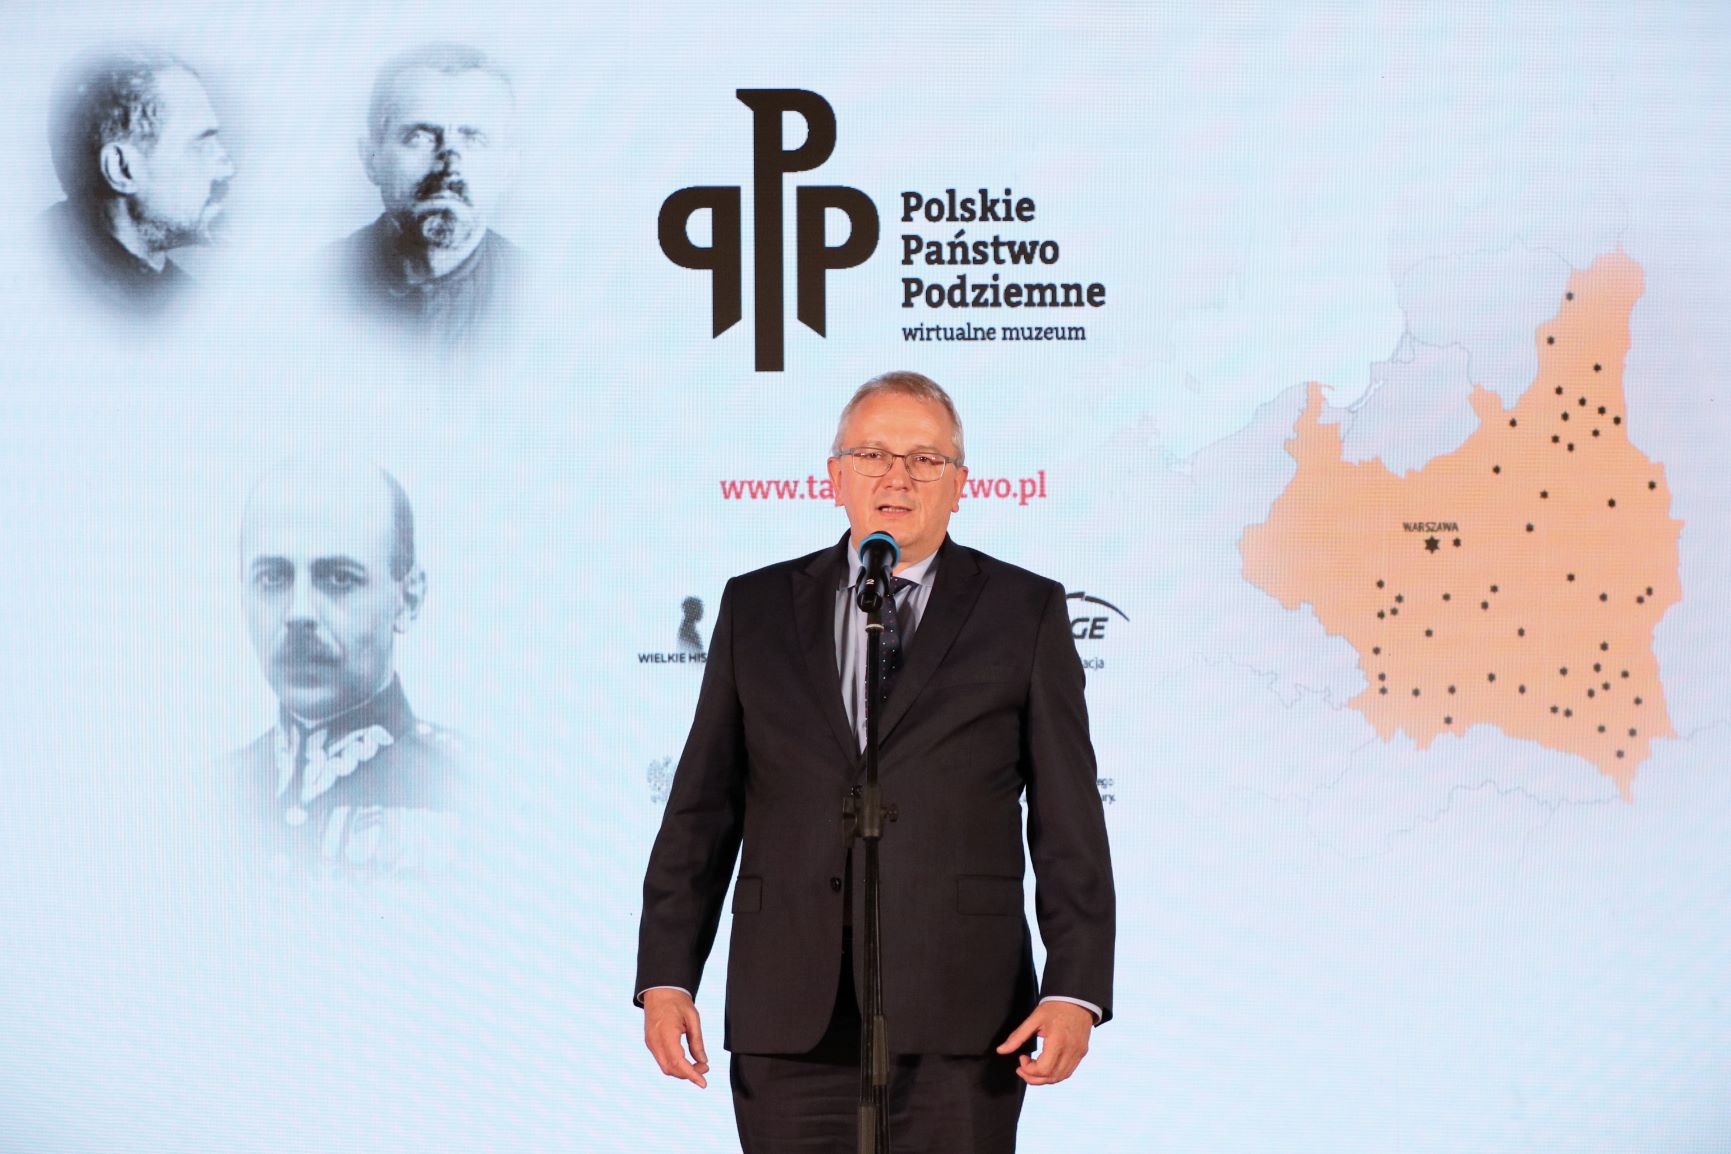 Polish Underground State Virtual Museum: Honoring the Brave Civil Actions of the Polish People